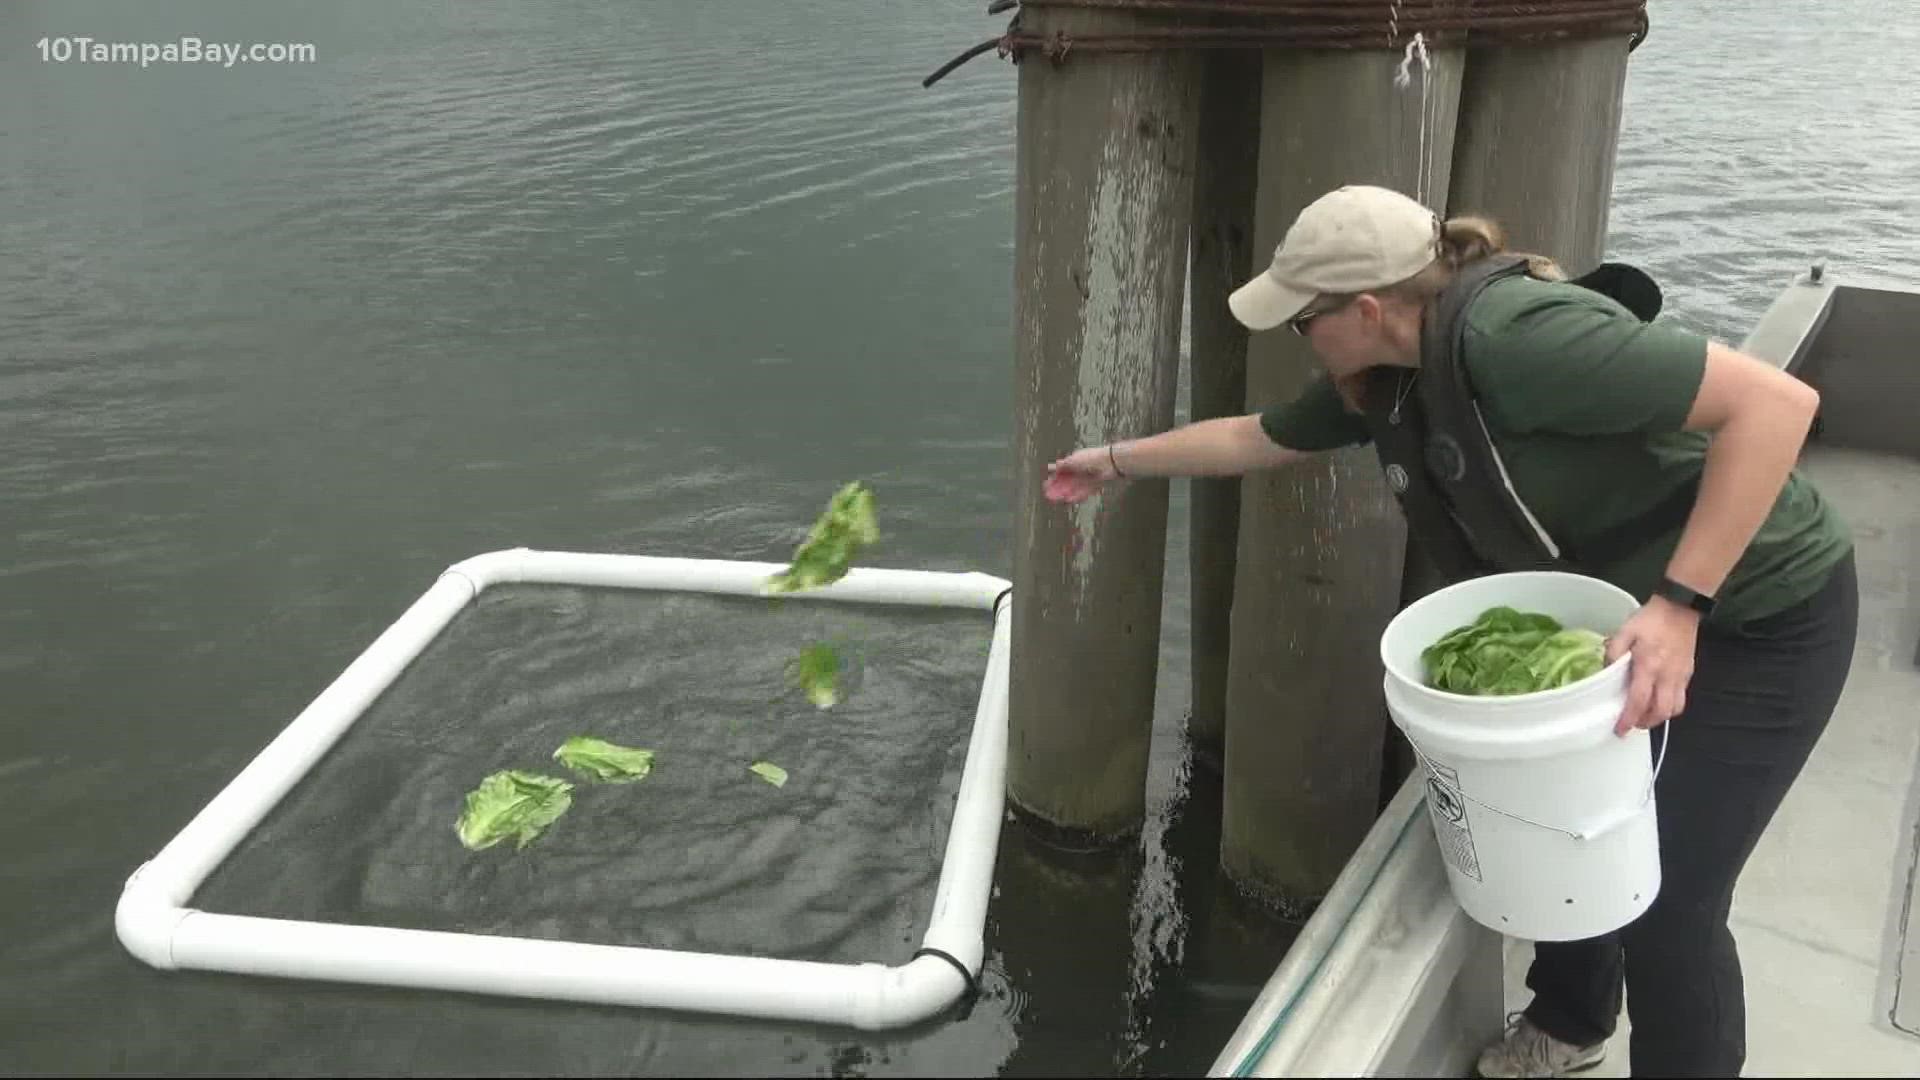 FWC says in total, the feeding program dispersed 202,155 pounds of lettuce at a cost of about $117,000.